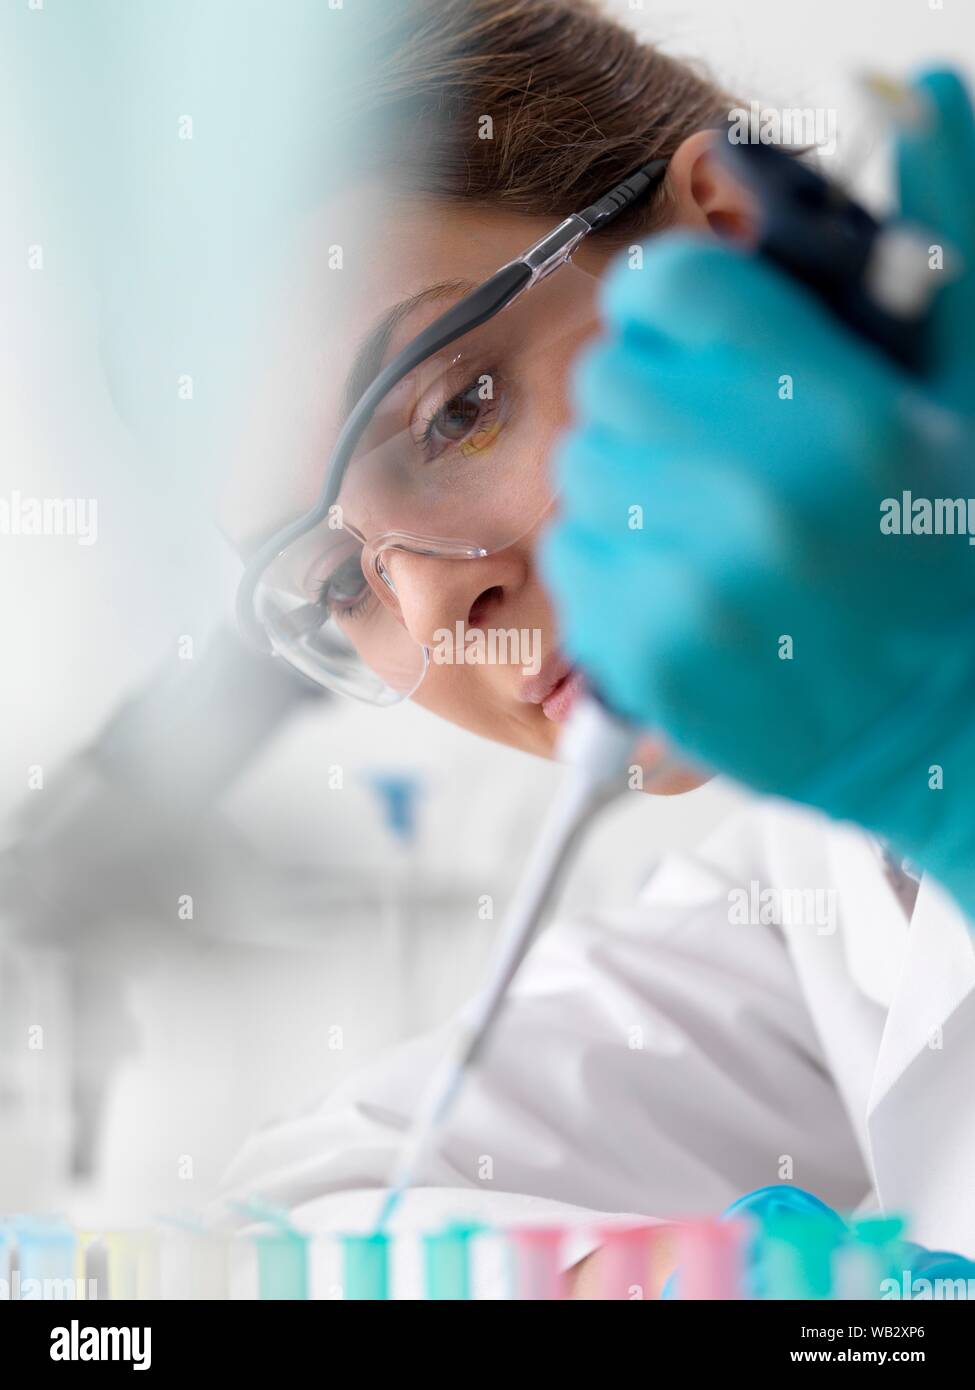 Biotechnology research. Scientist pipetting sample into a microcentrifuge tube ready for automated analysis. Stock Photo